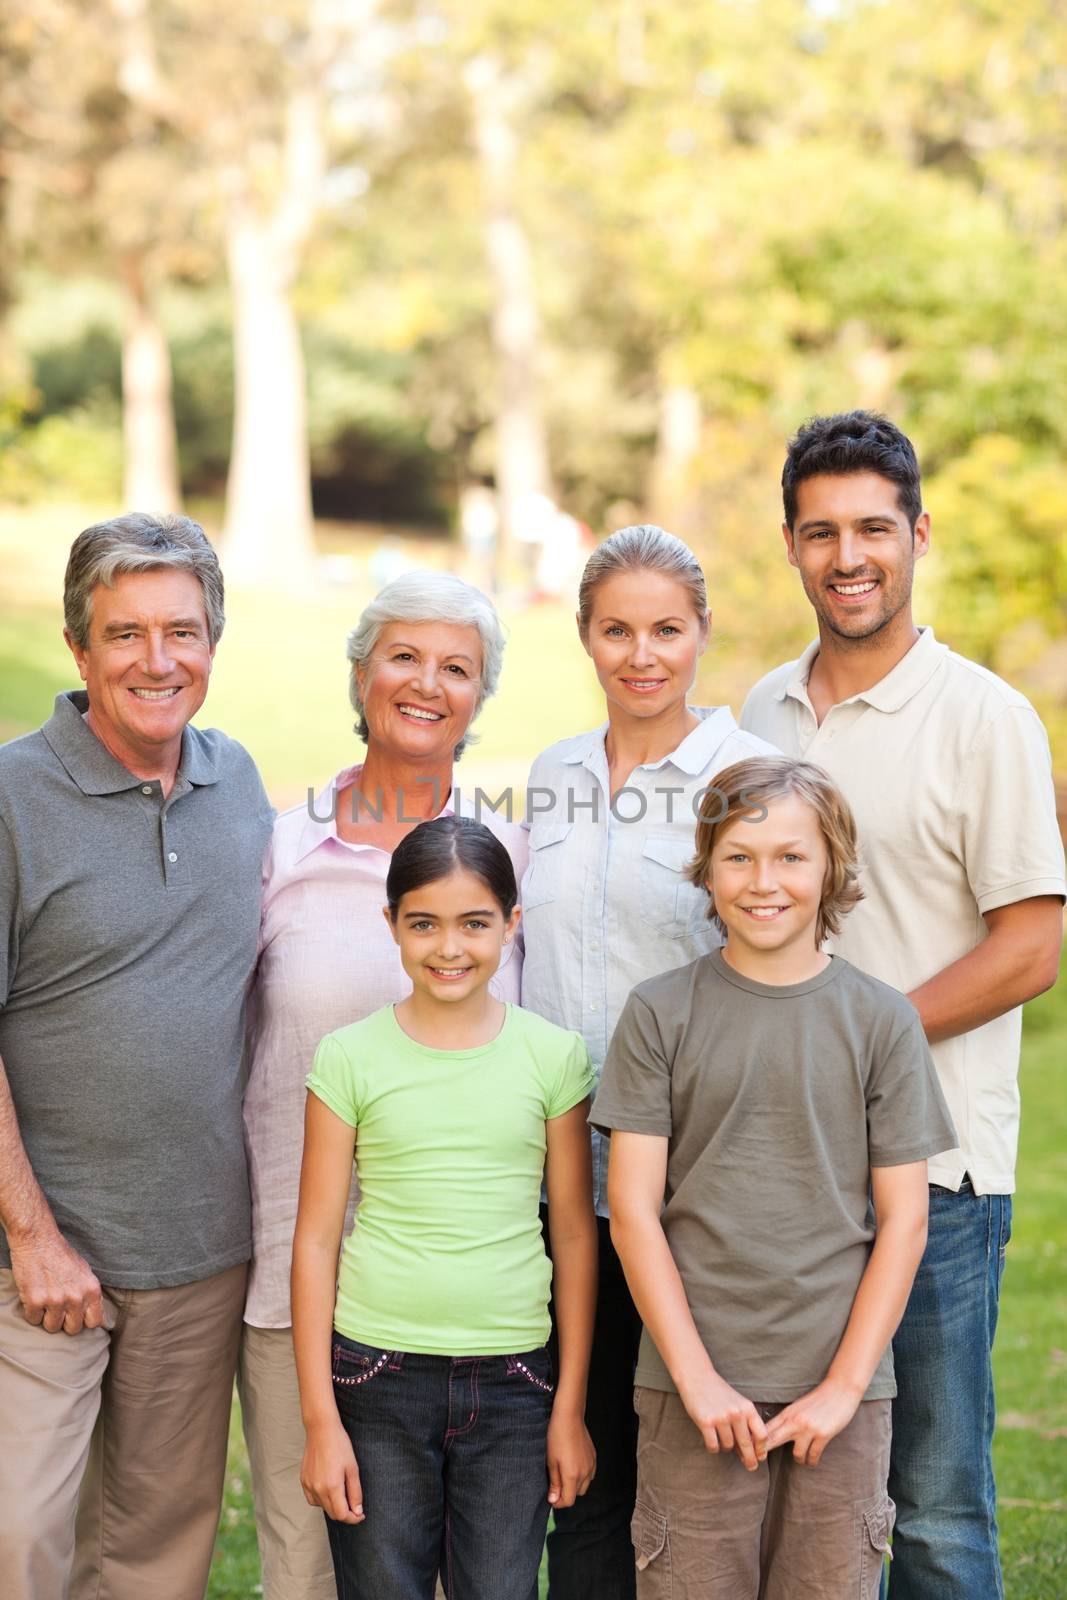 Family in the park during the summer